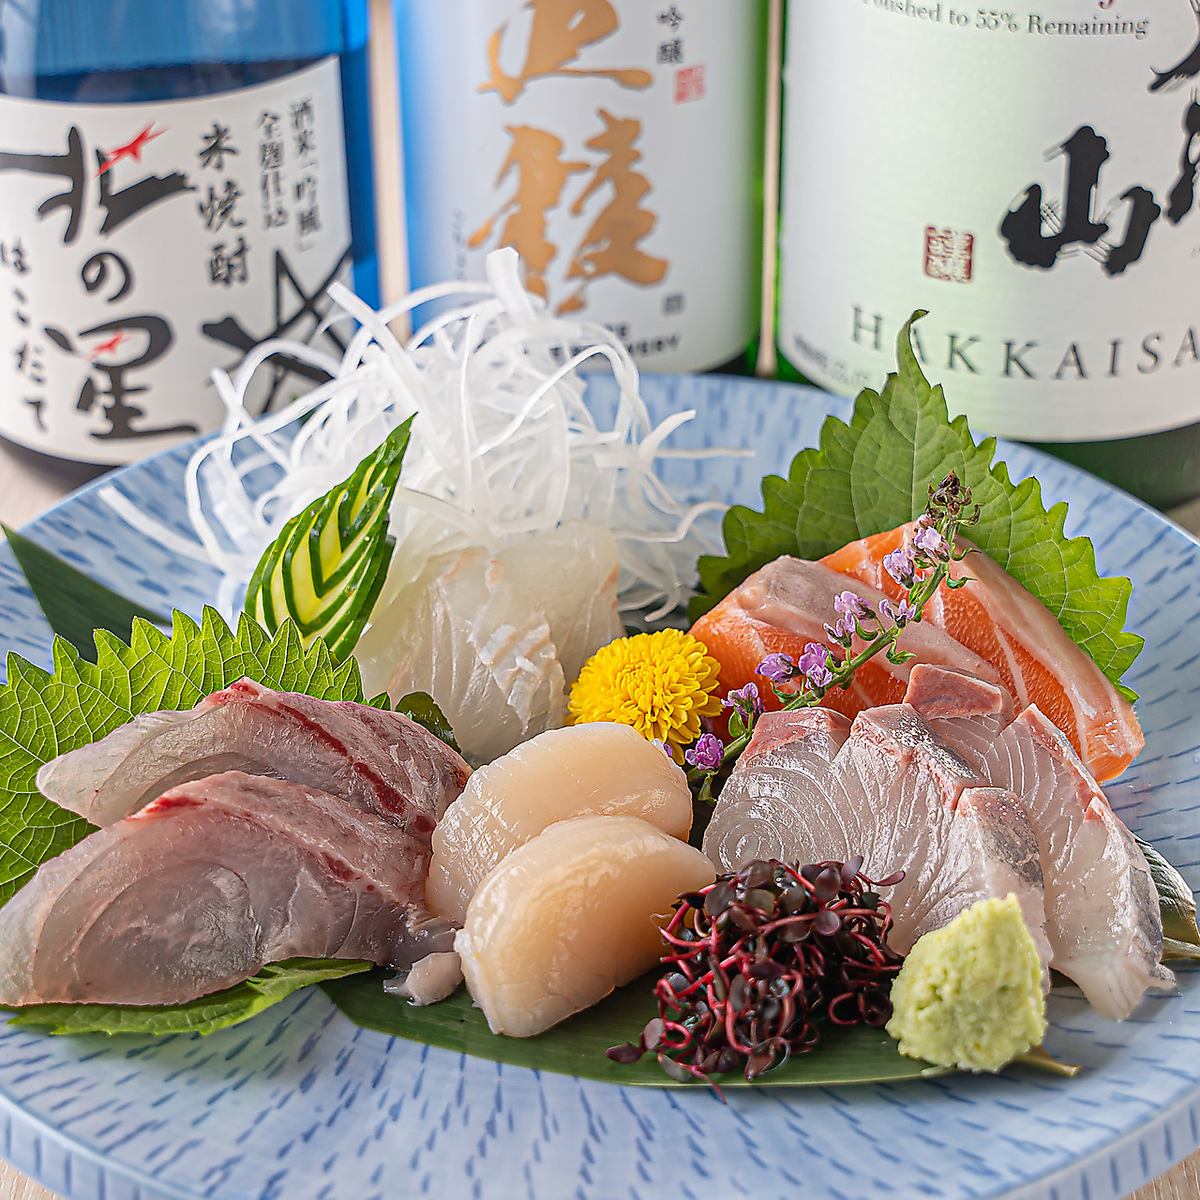 We deliver fresh live fish directly from Hakodate! We also offer a wide variety of local sake!